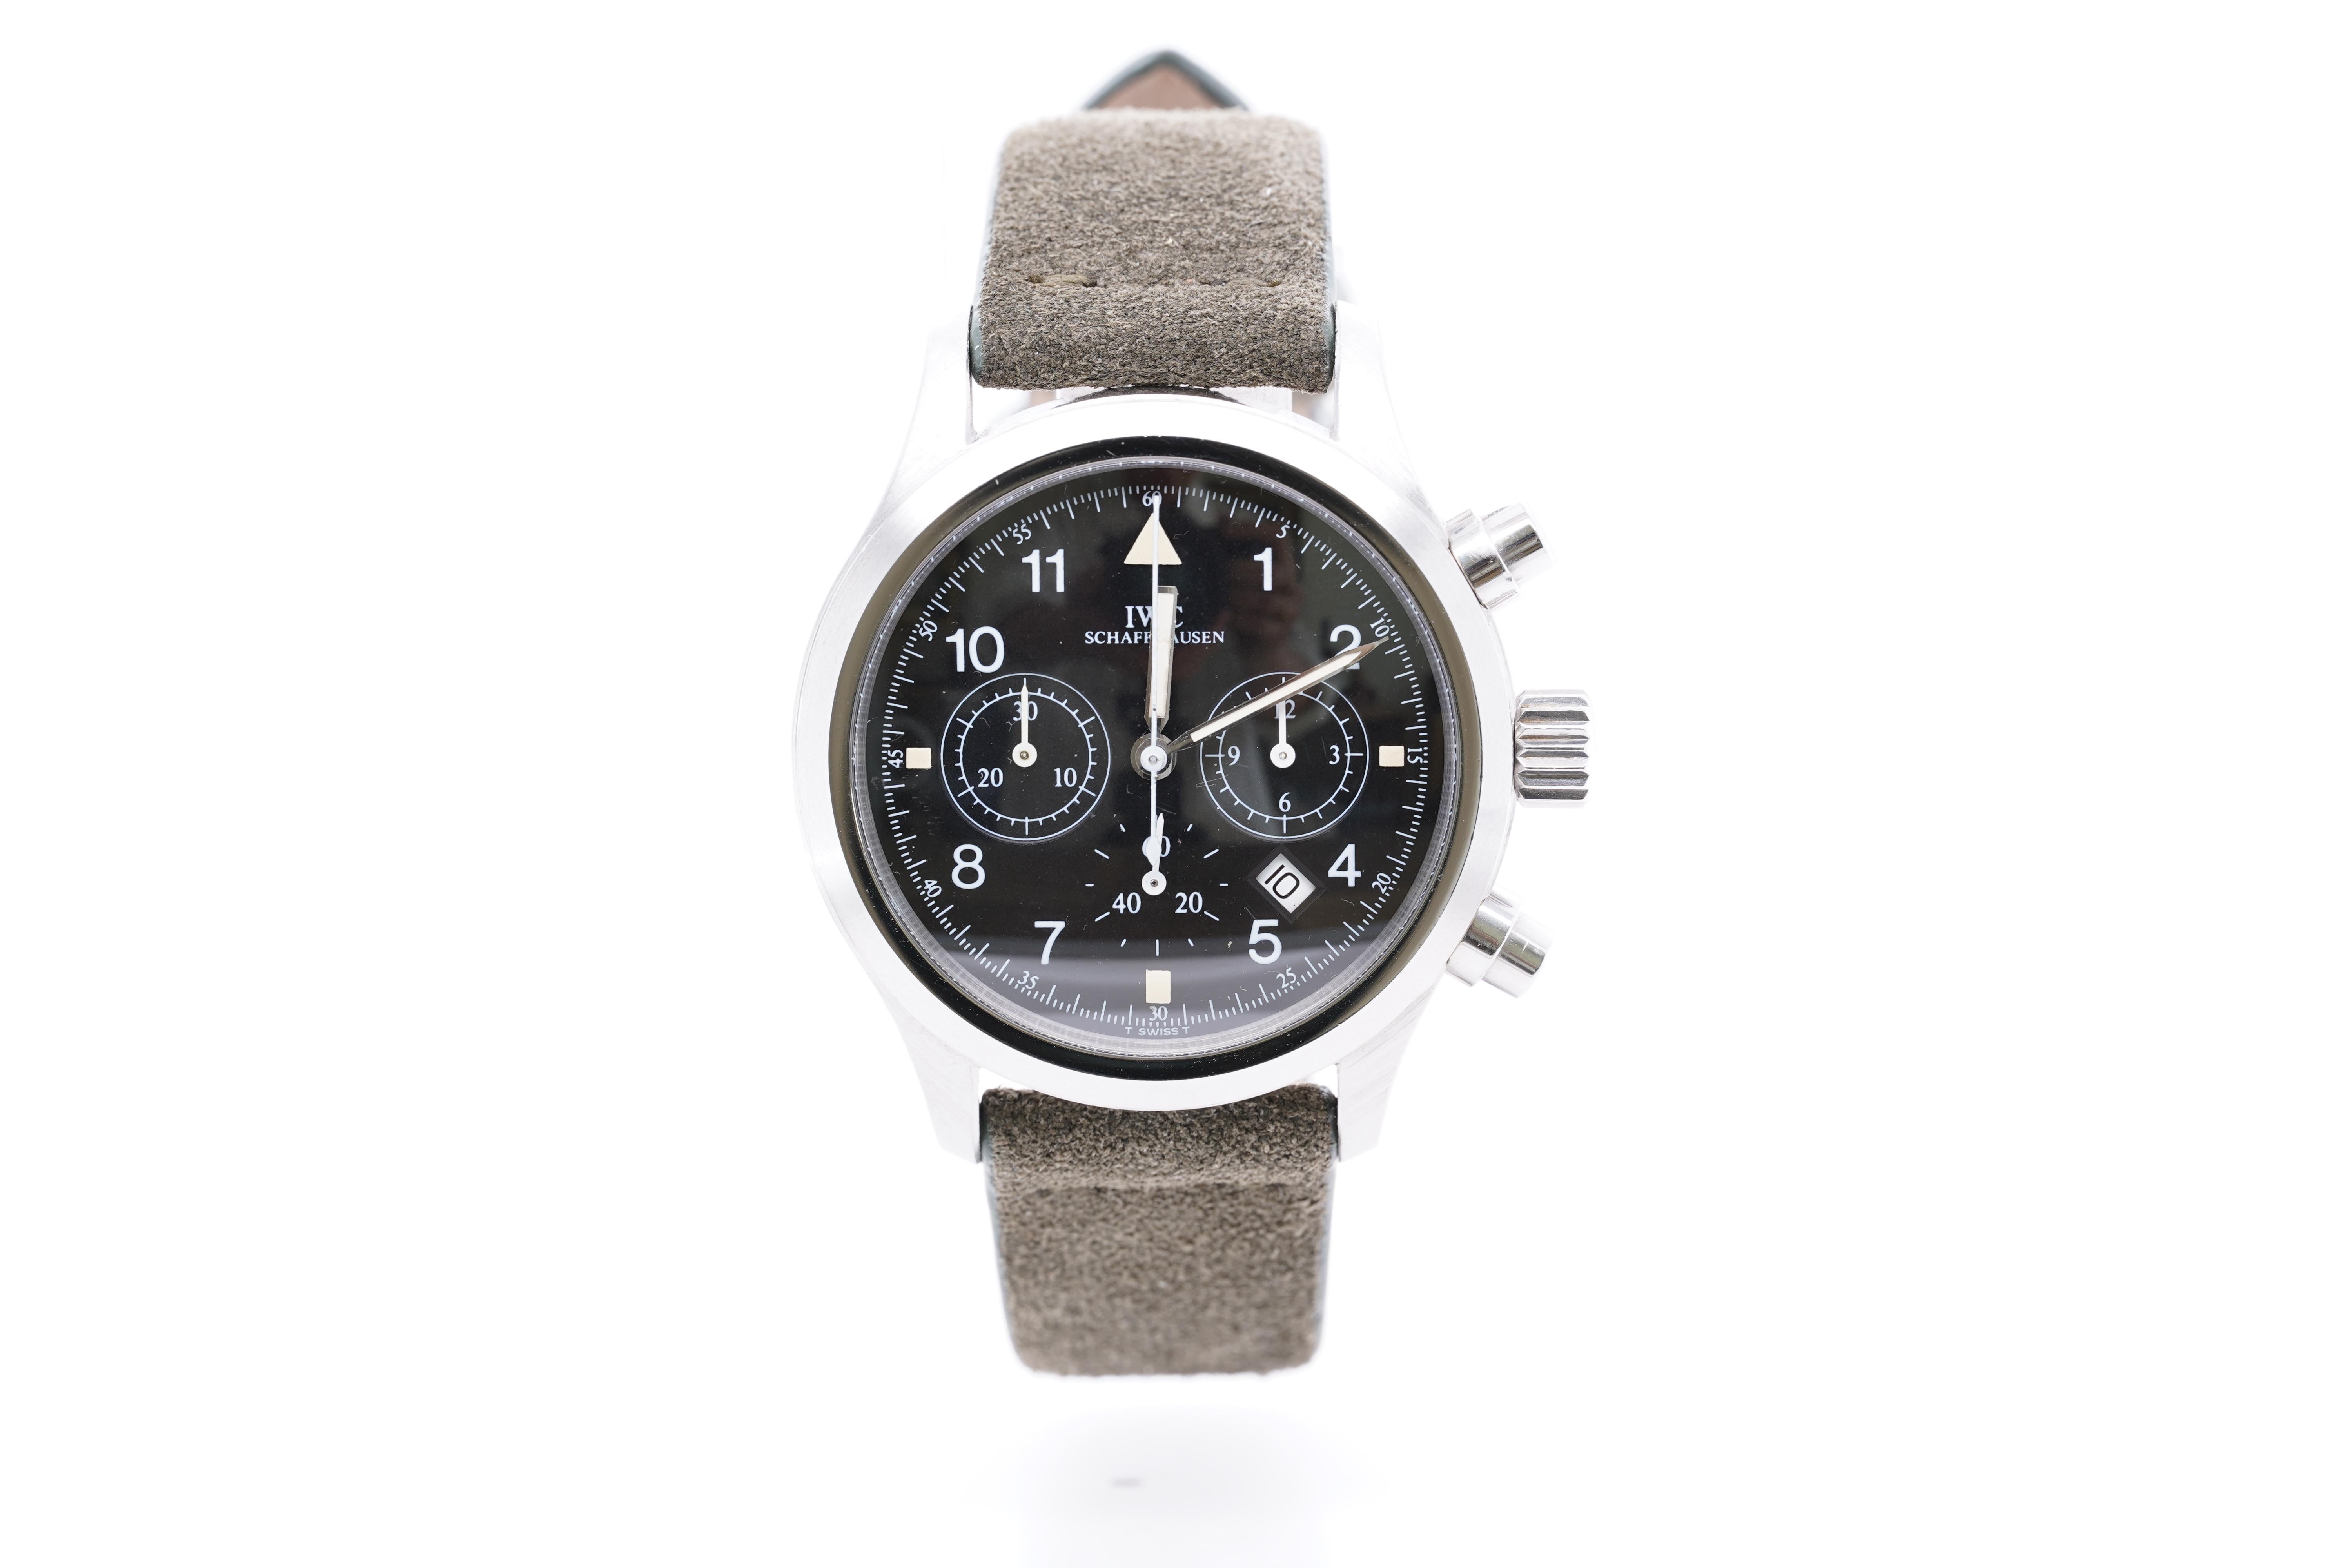 IWC Schaffhausen Fliegerchronograph Aviator (23.3mm) Pilot's Watch Grey Suede Strap, Original Box, Pre-Owned
Serial # 2611863
Free shipping anywhere in the US.

IWC International Watch Co. AG, also known as IWC Schaffhausen, is a luxury Swiss watch